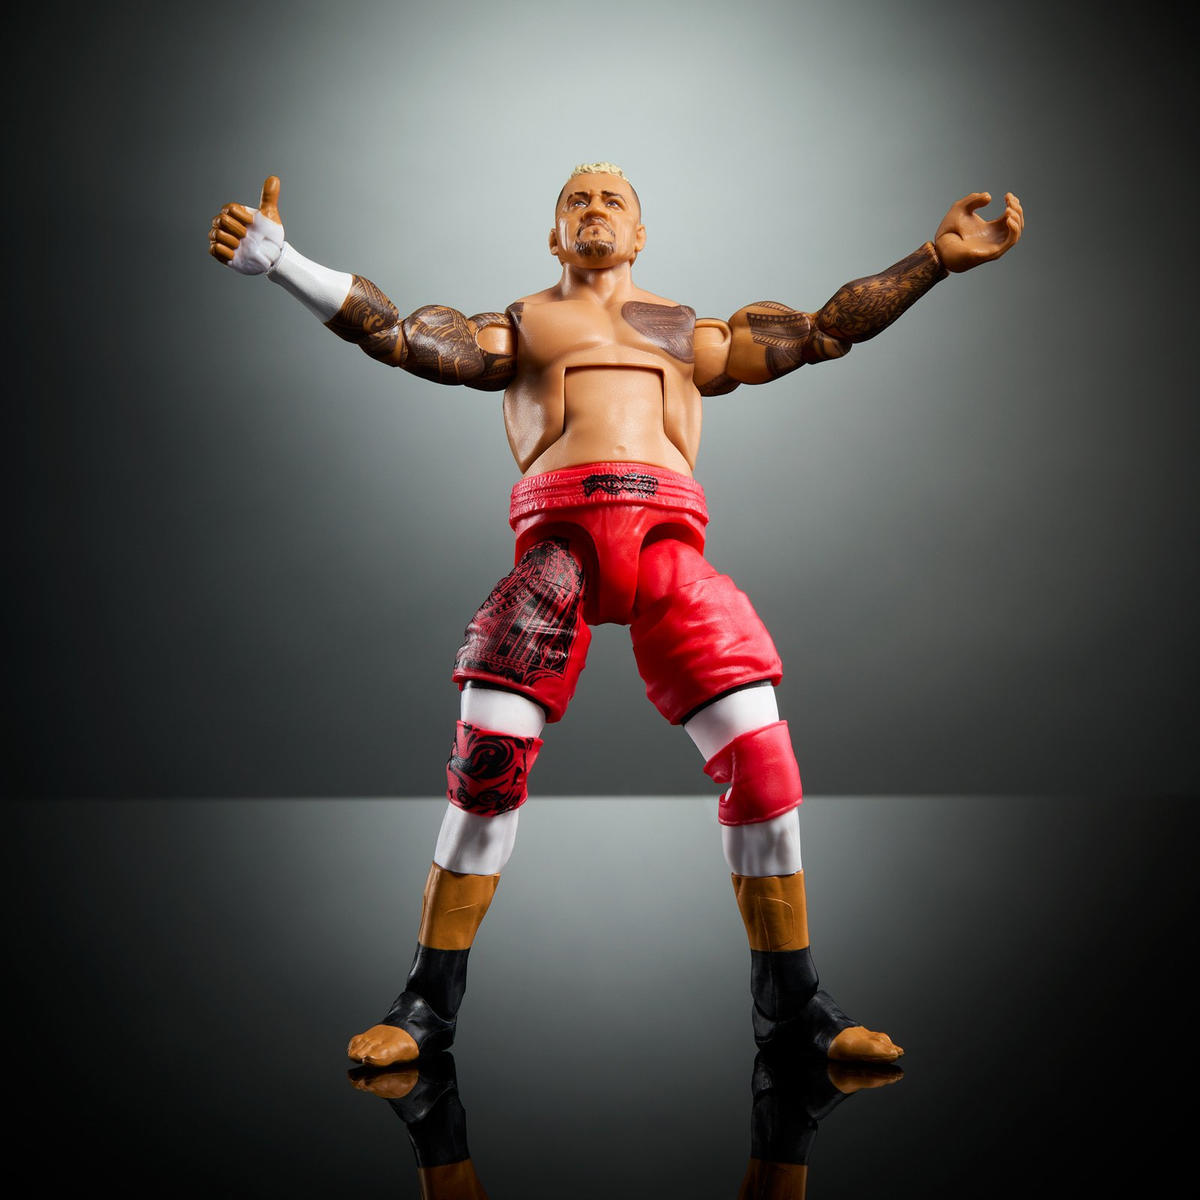 Here's my attempt at a custom Solo Sikoa Elite Figure!!! I loved how t, WWE  Figures